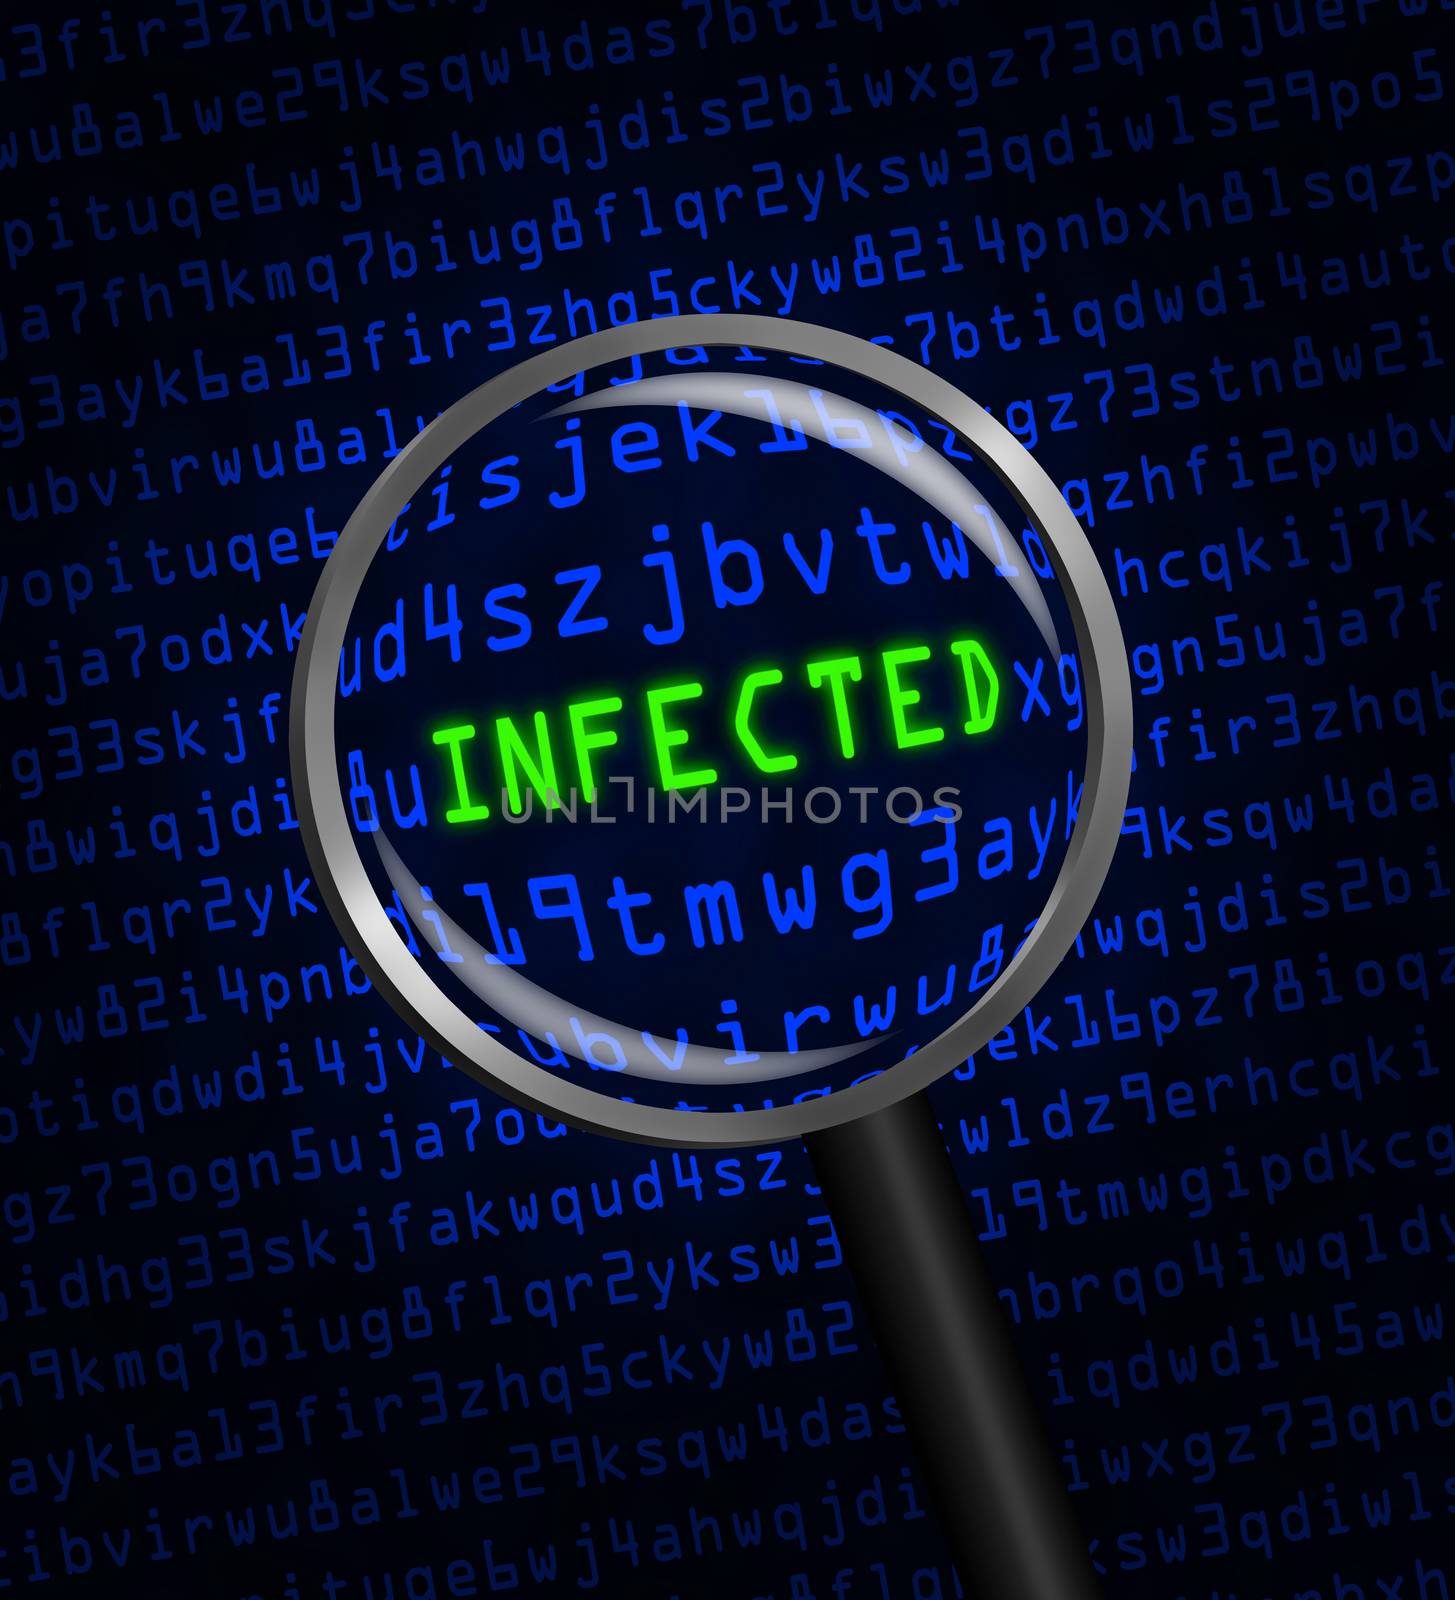 "INFECTED" revealed in computer code through a magnifying glass  by Balefire9